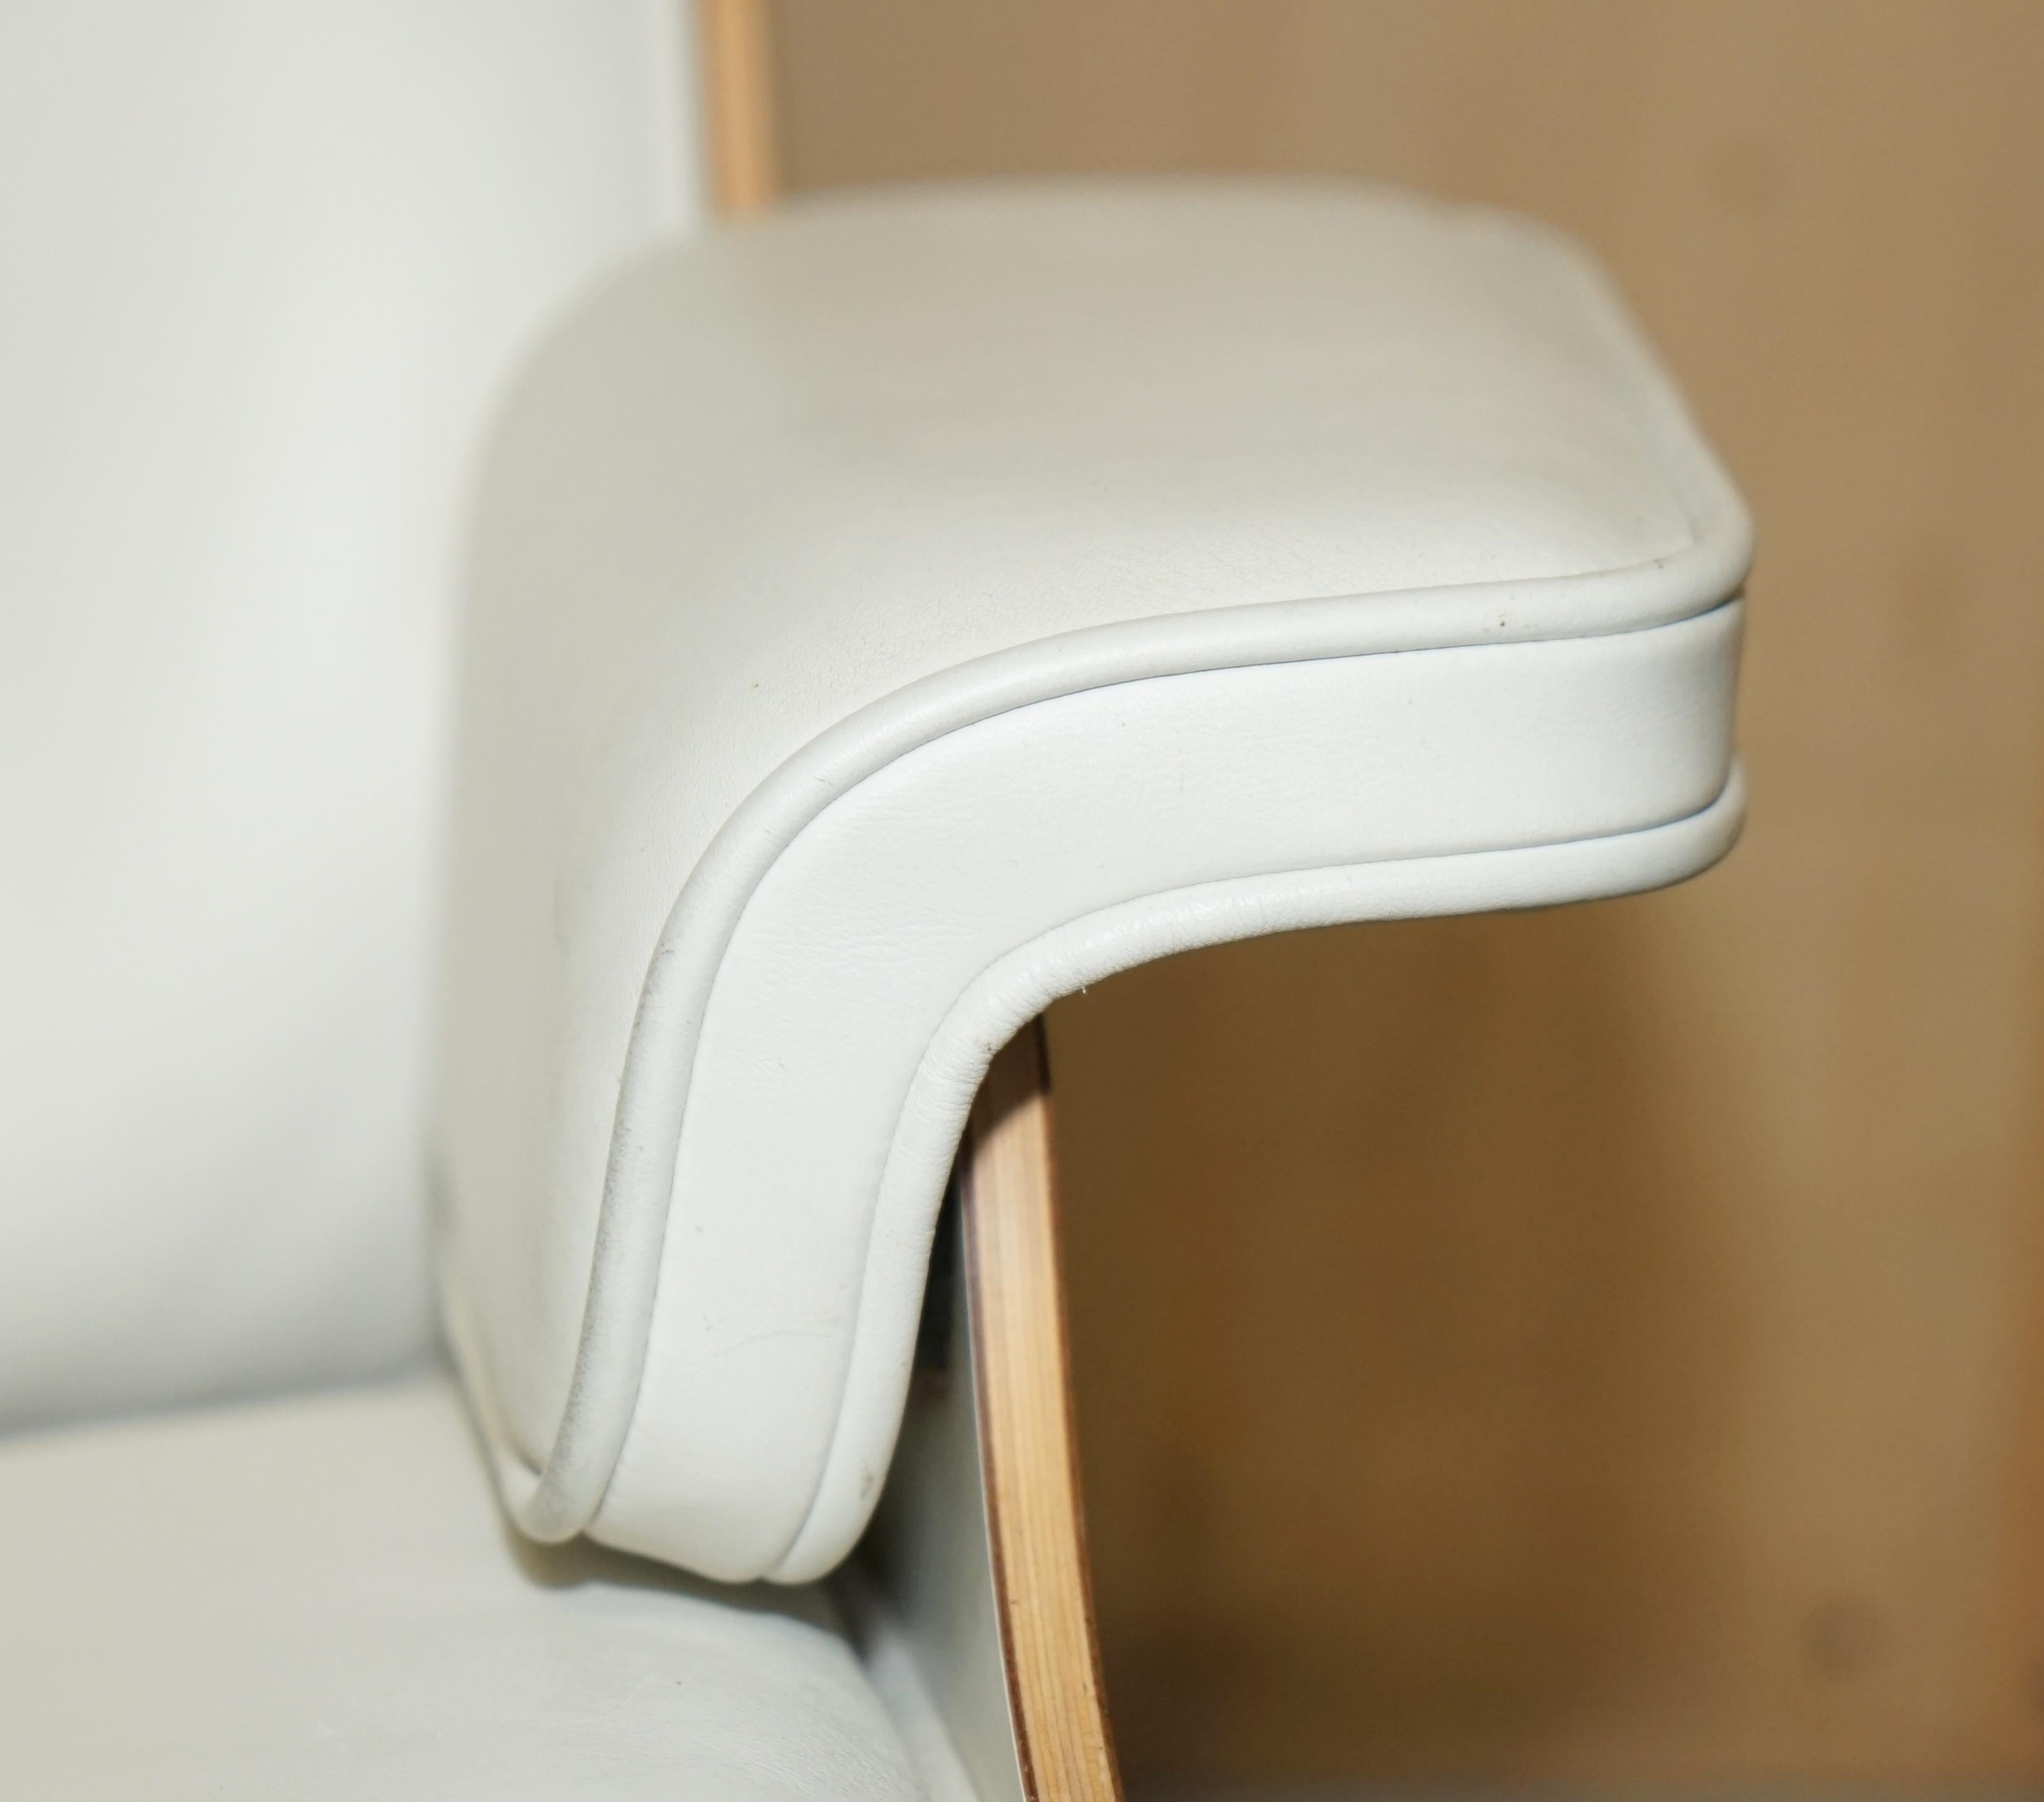 Whiting fauteuil de salon Charles and Ray Eames american cherry wood white leather en vente 2